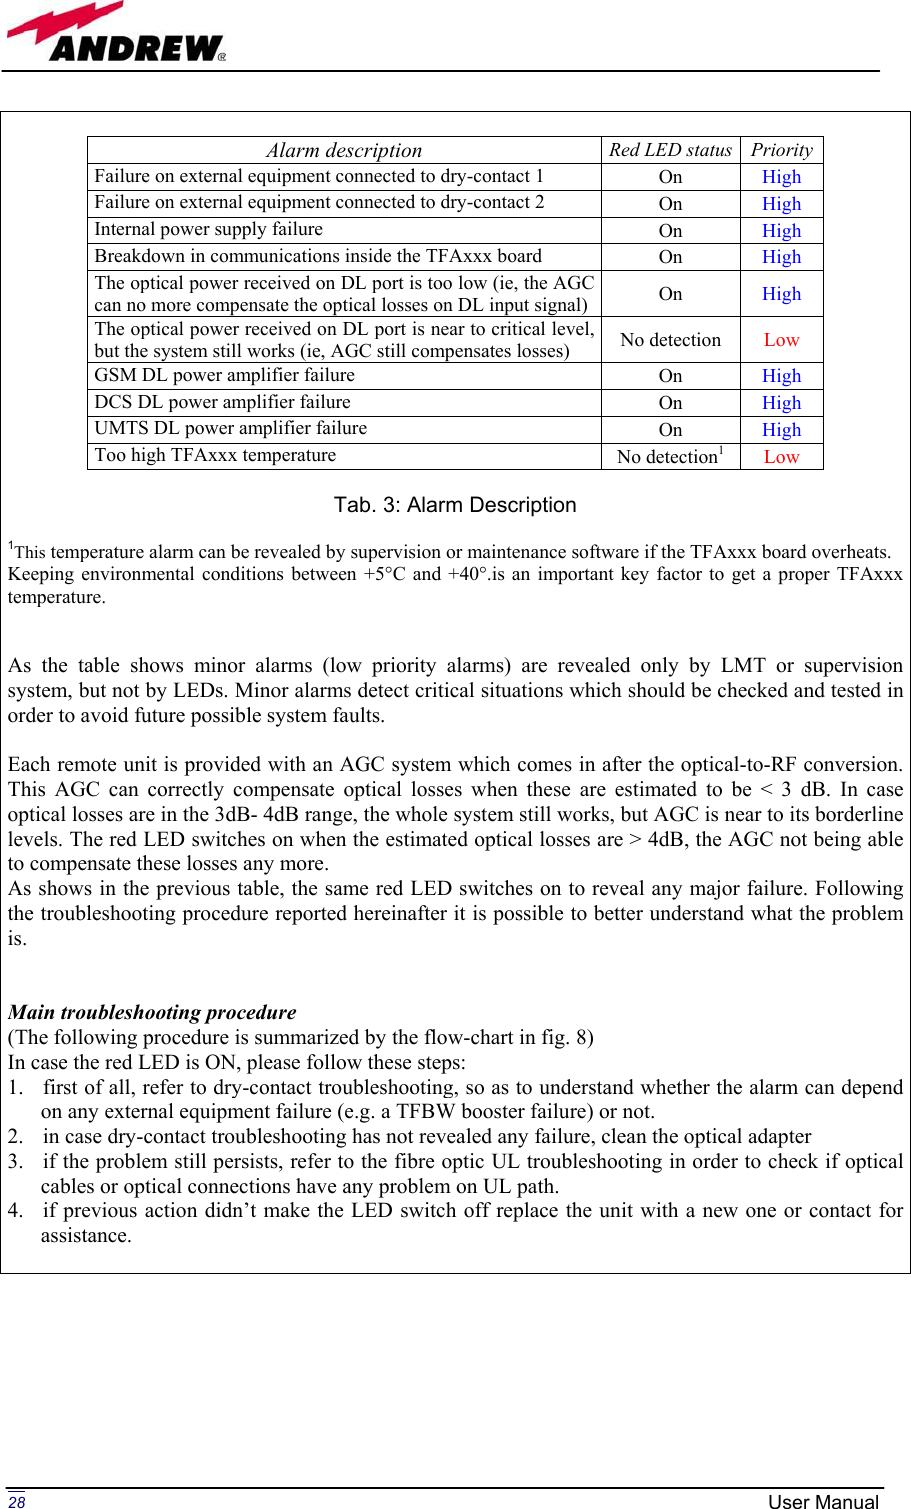 Page 28 of Andrew Wireless Innovations Group BCP-TFAM23 Model TFAM23 Downlink Booster User Manual MN024 04 rev3